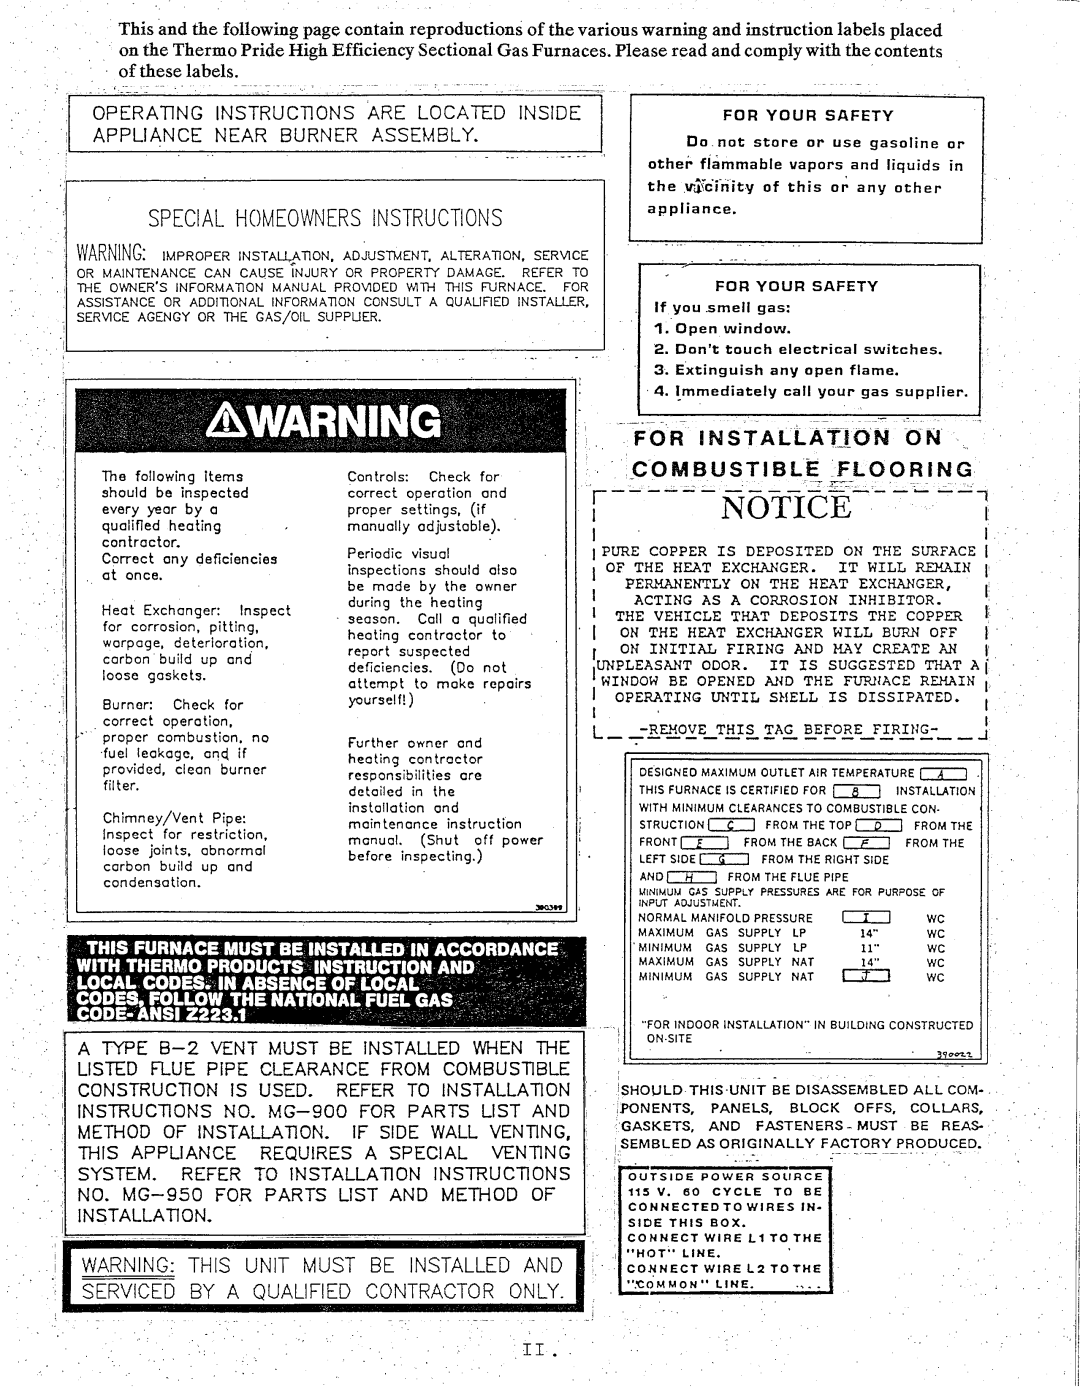 Thermo Products igh2-75 manual 